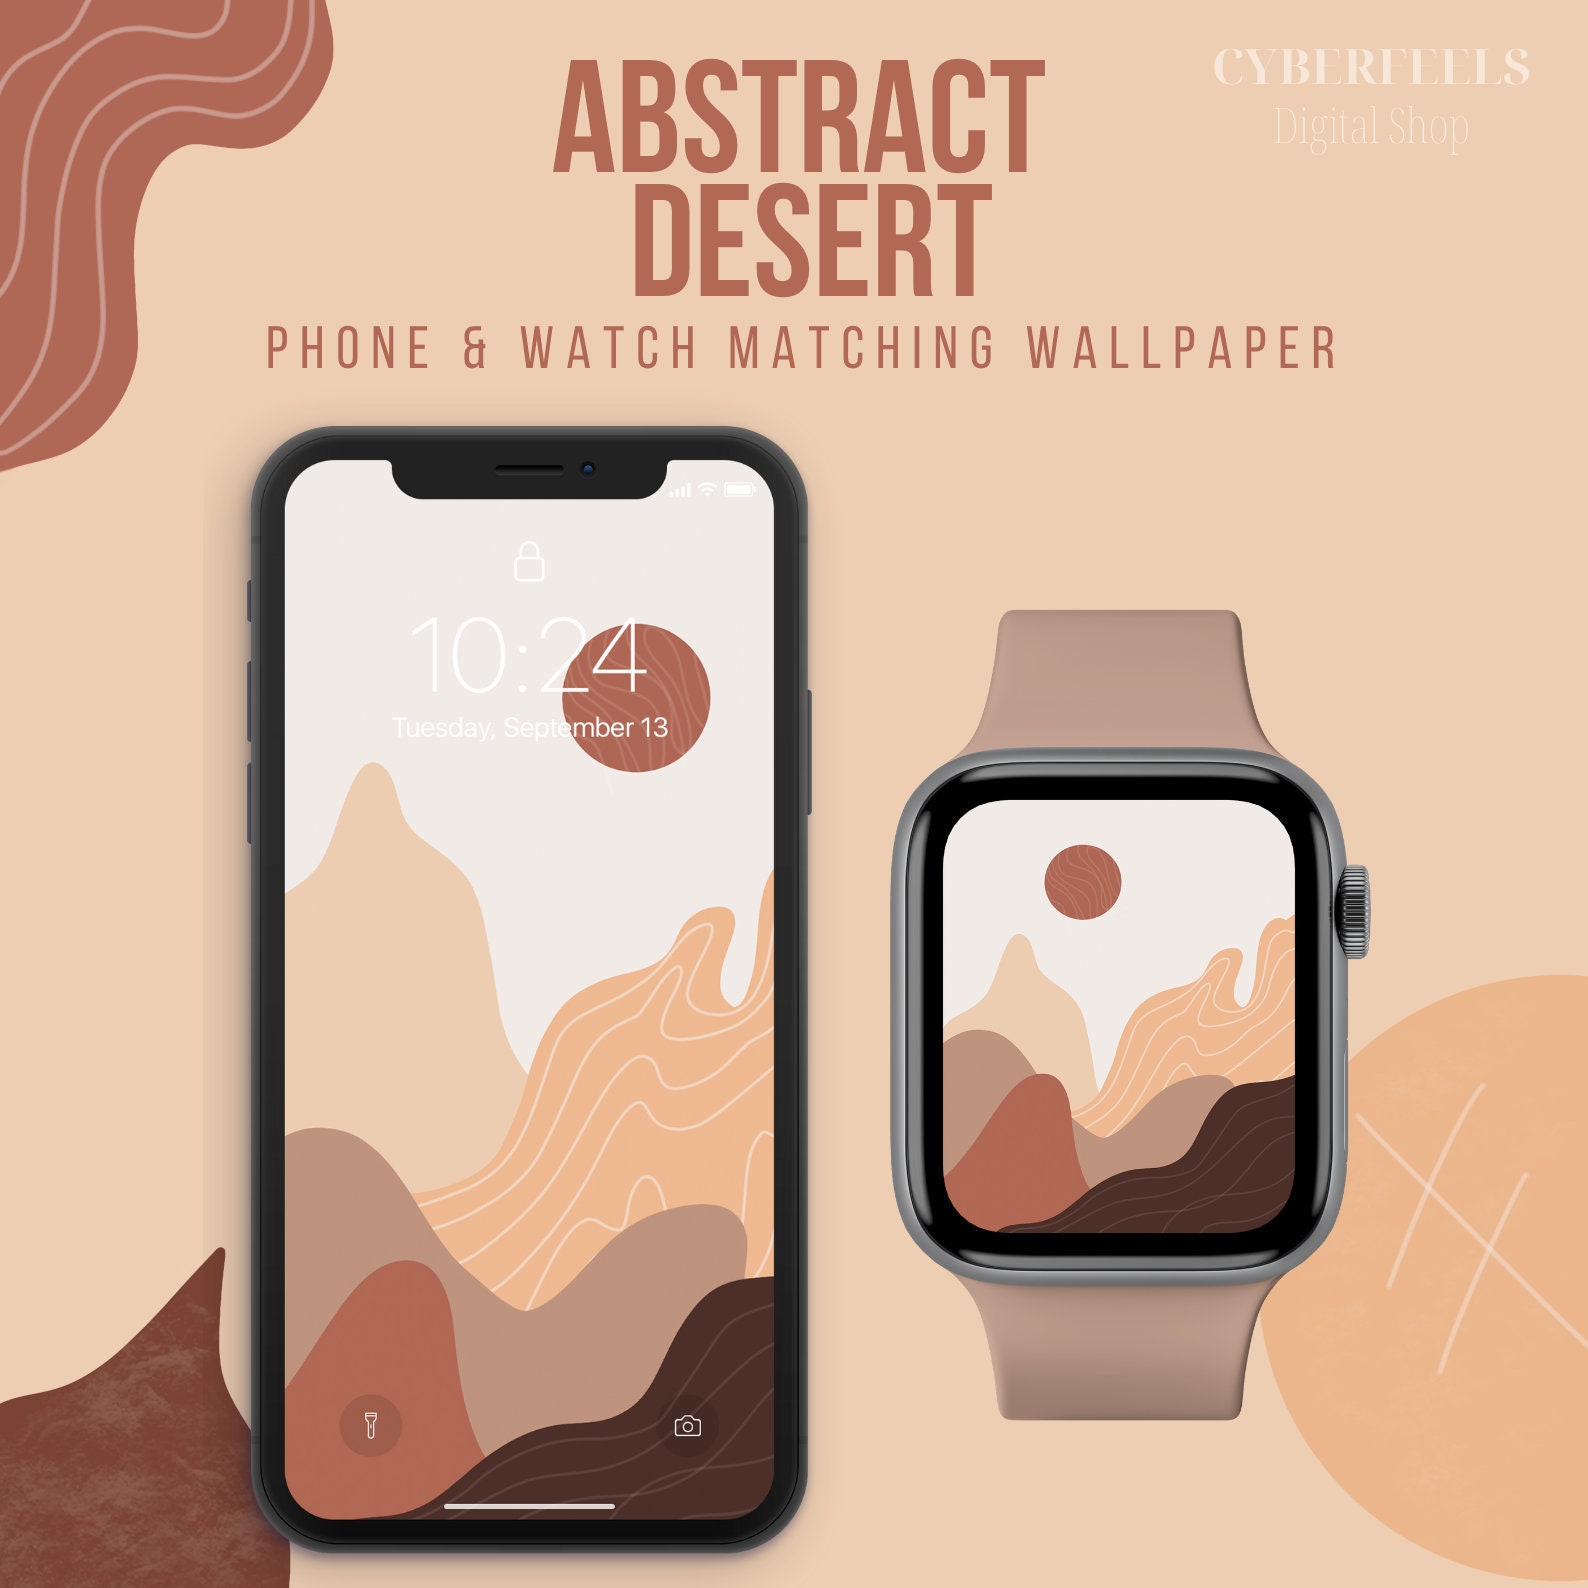 Wallpaper iphone and apple watch